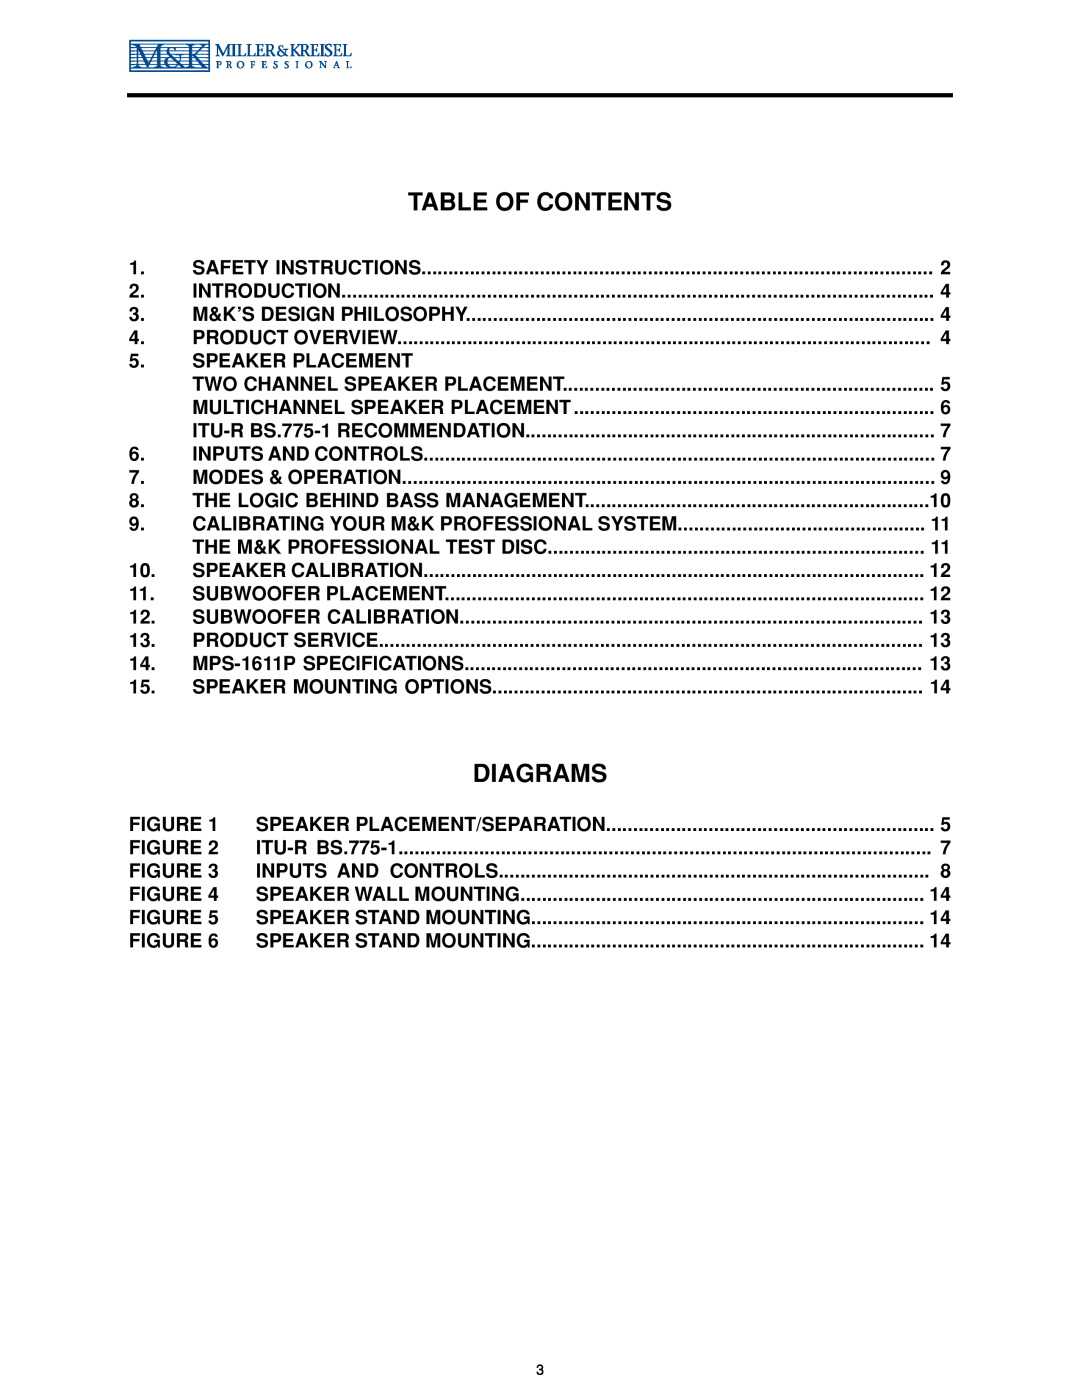 MK Sound MPS-1611P operation manual Table Of Contents, Diagrams 